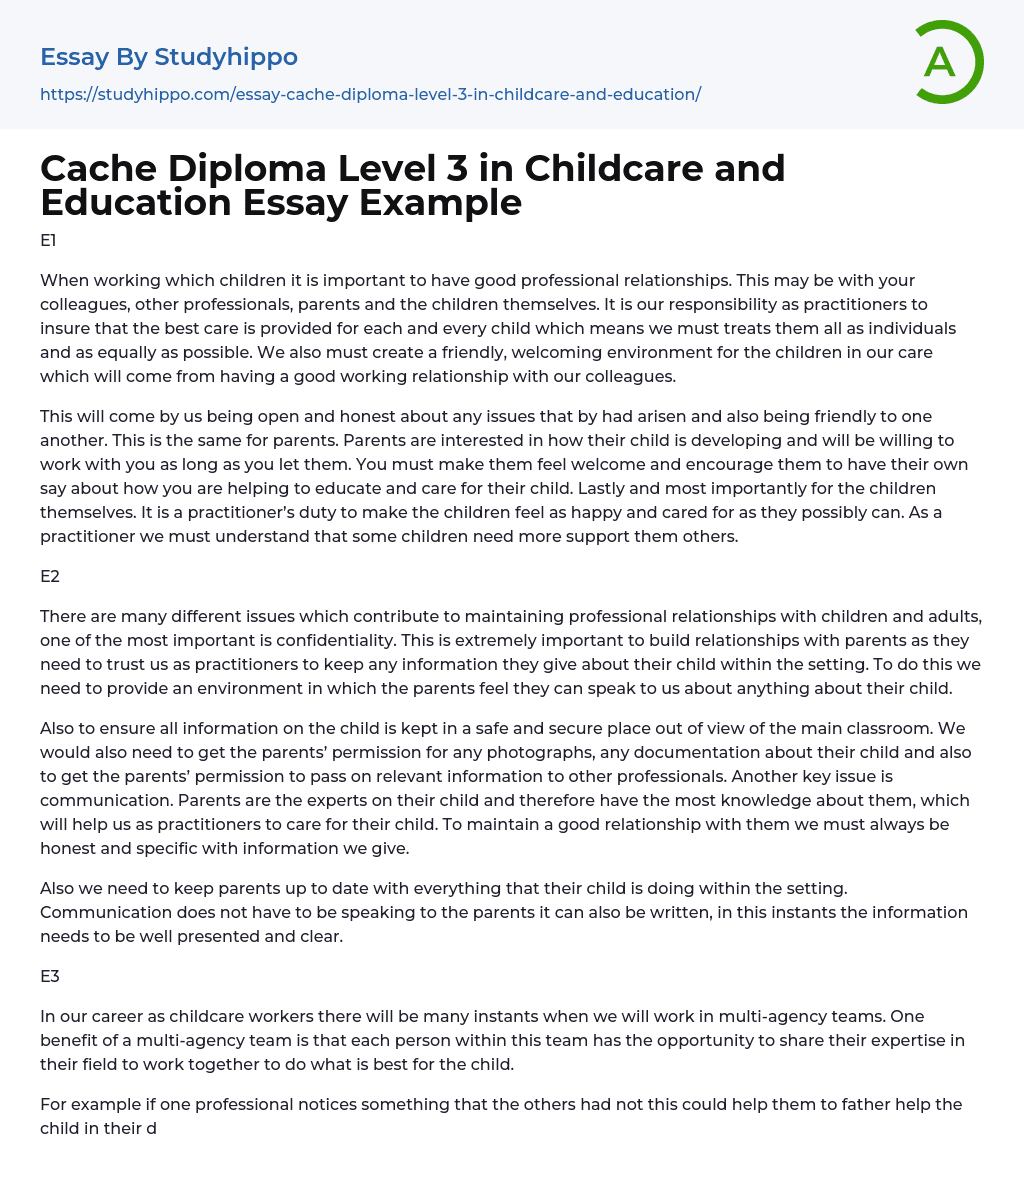 Cache Diploma Level 3 in Childcare and Education Essay Example